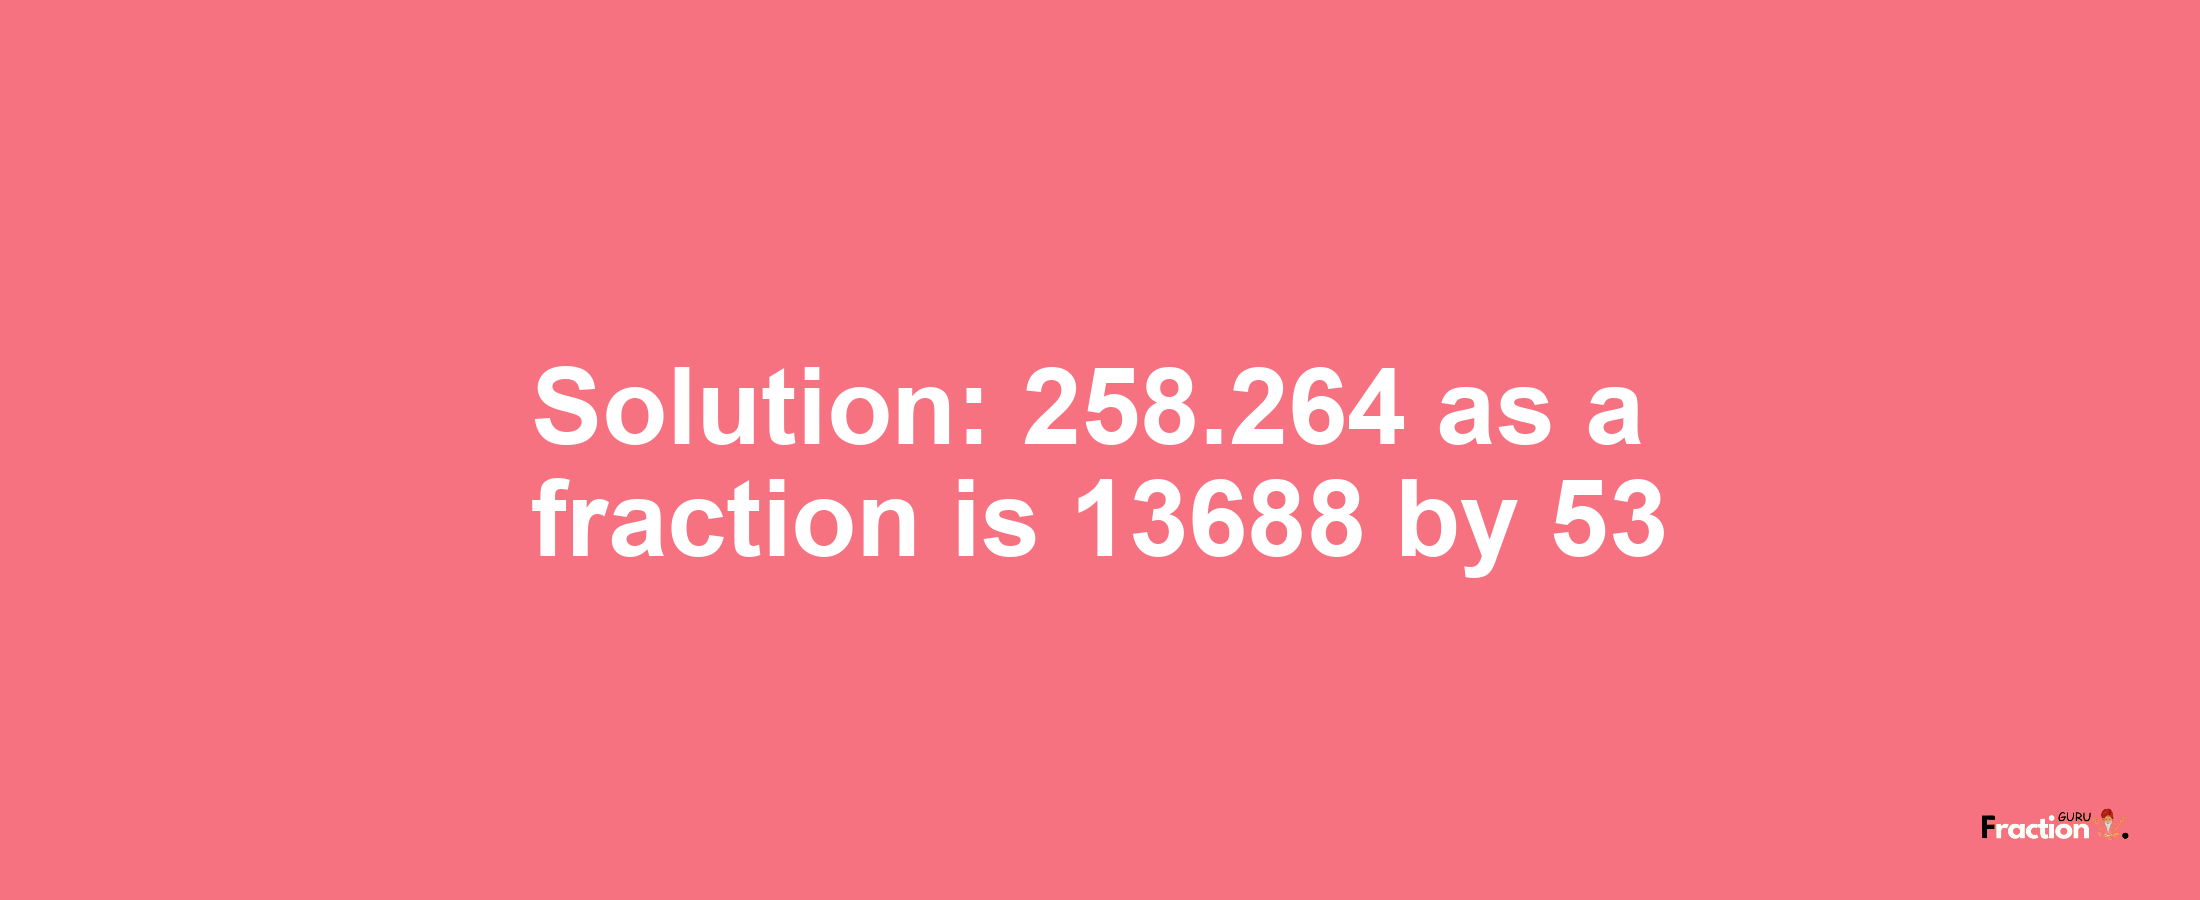 Solution:258.264 as a fraction is 13688/53